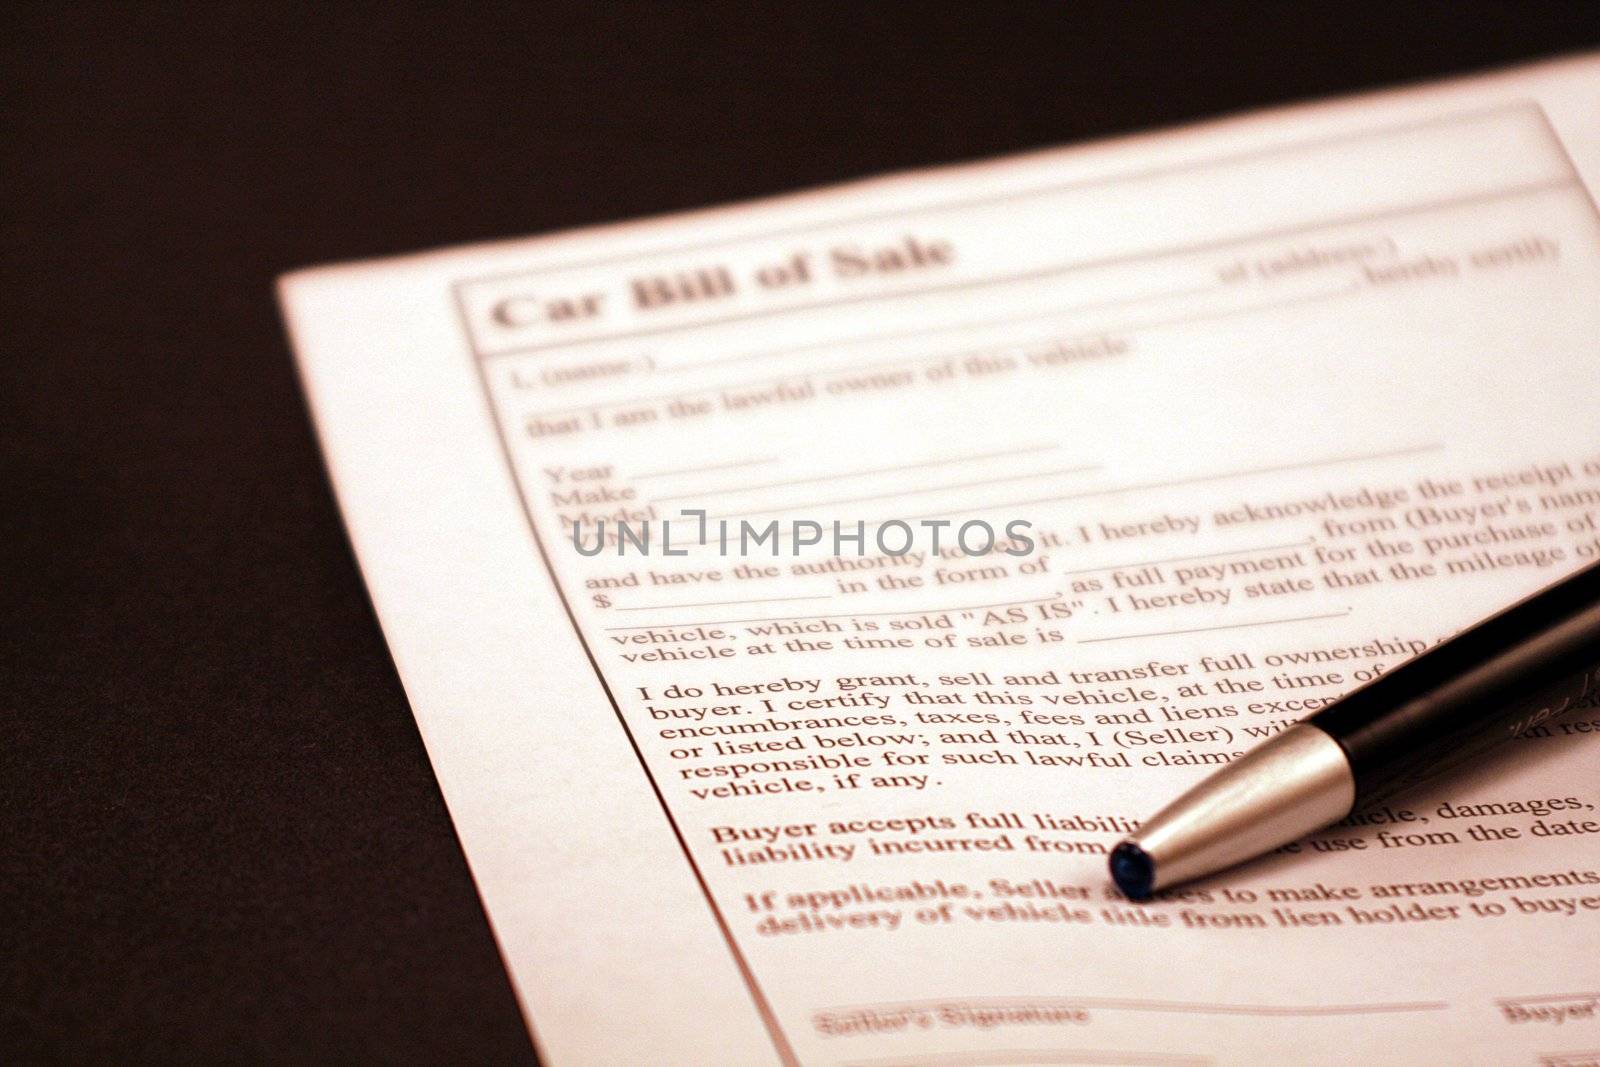 Car bill of sale document on black background. Black and silver ink pen on top of the financial document. Car loan, car sales, car loan opportunities.